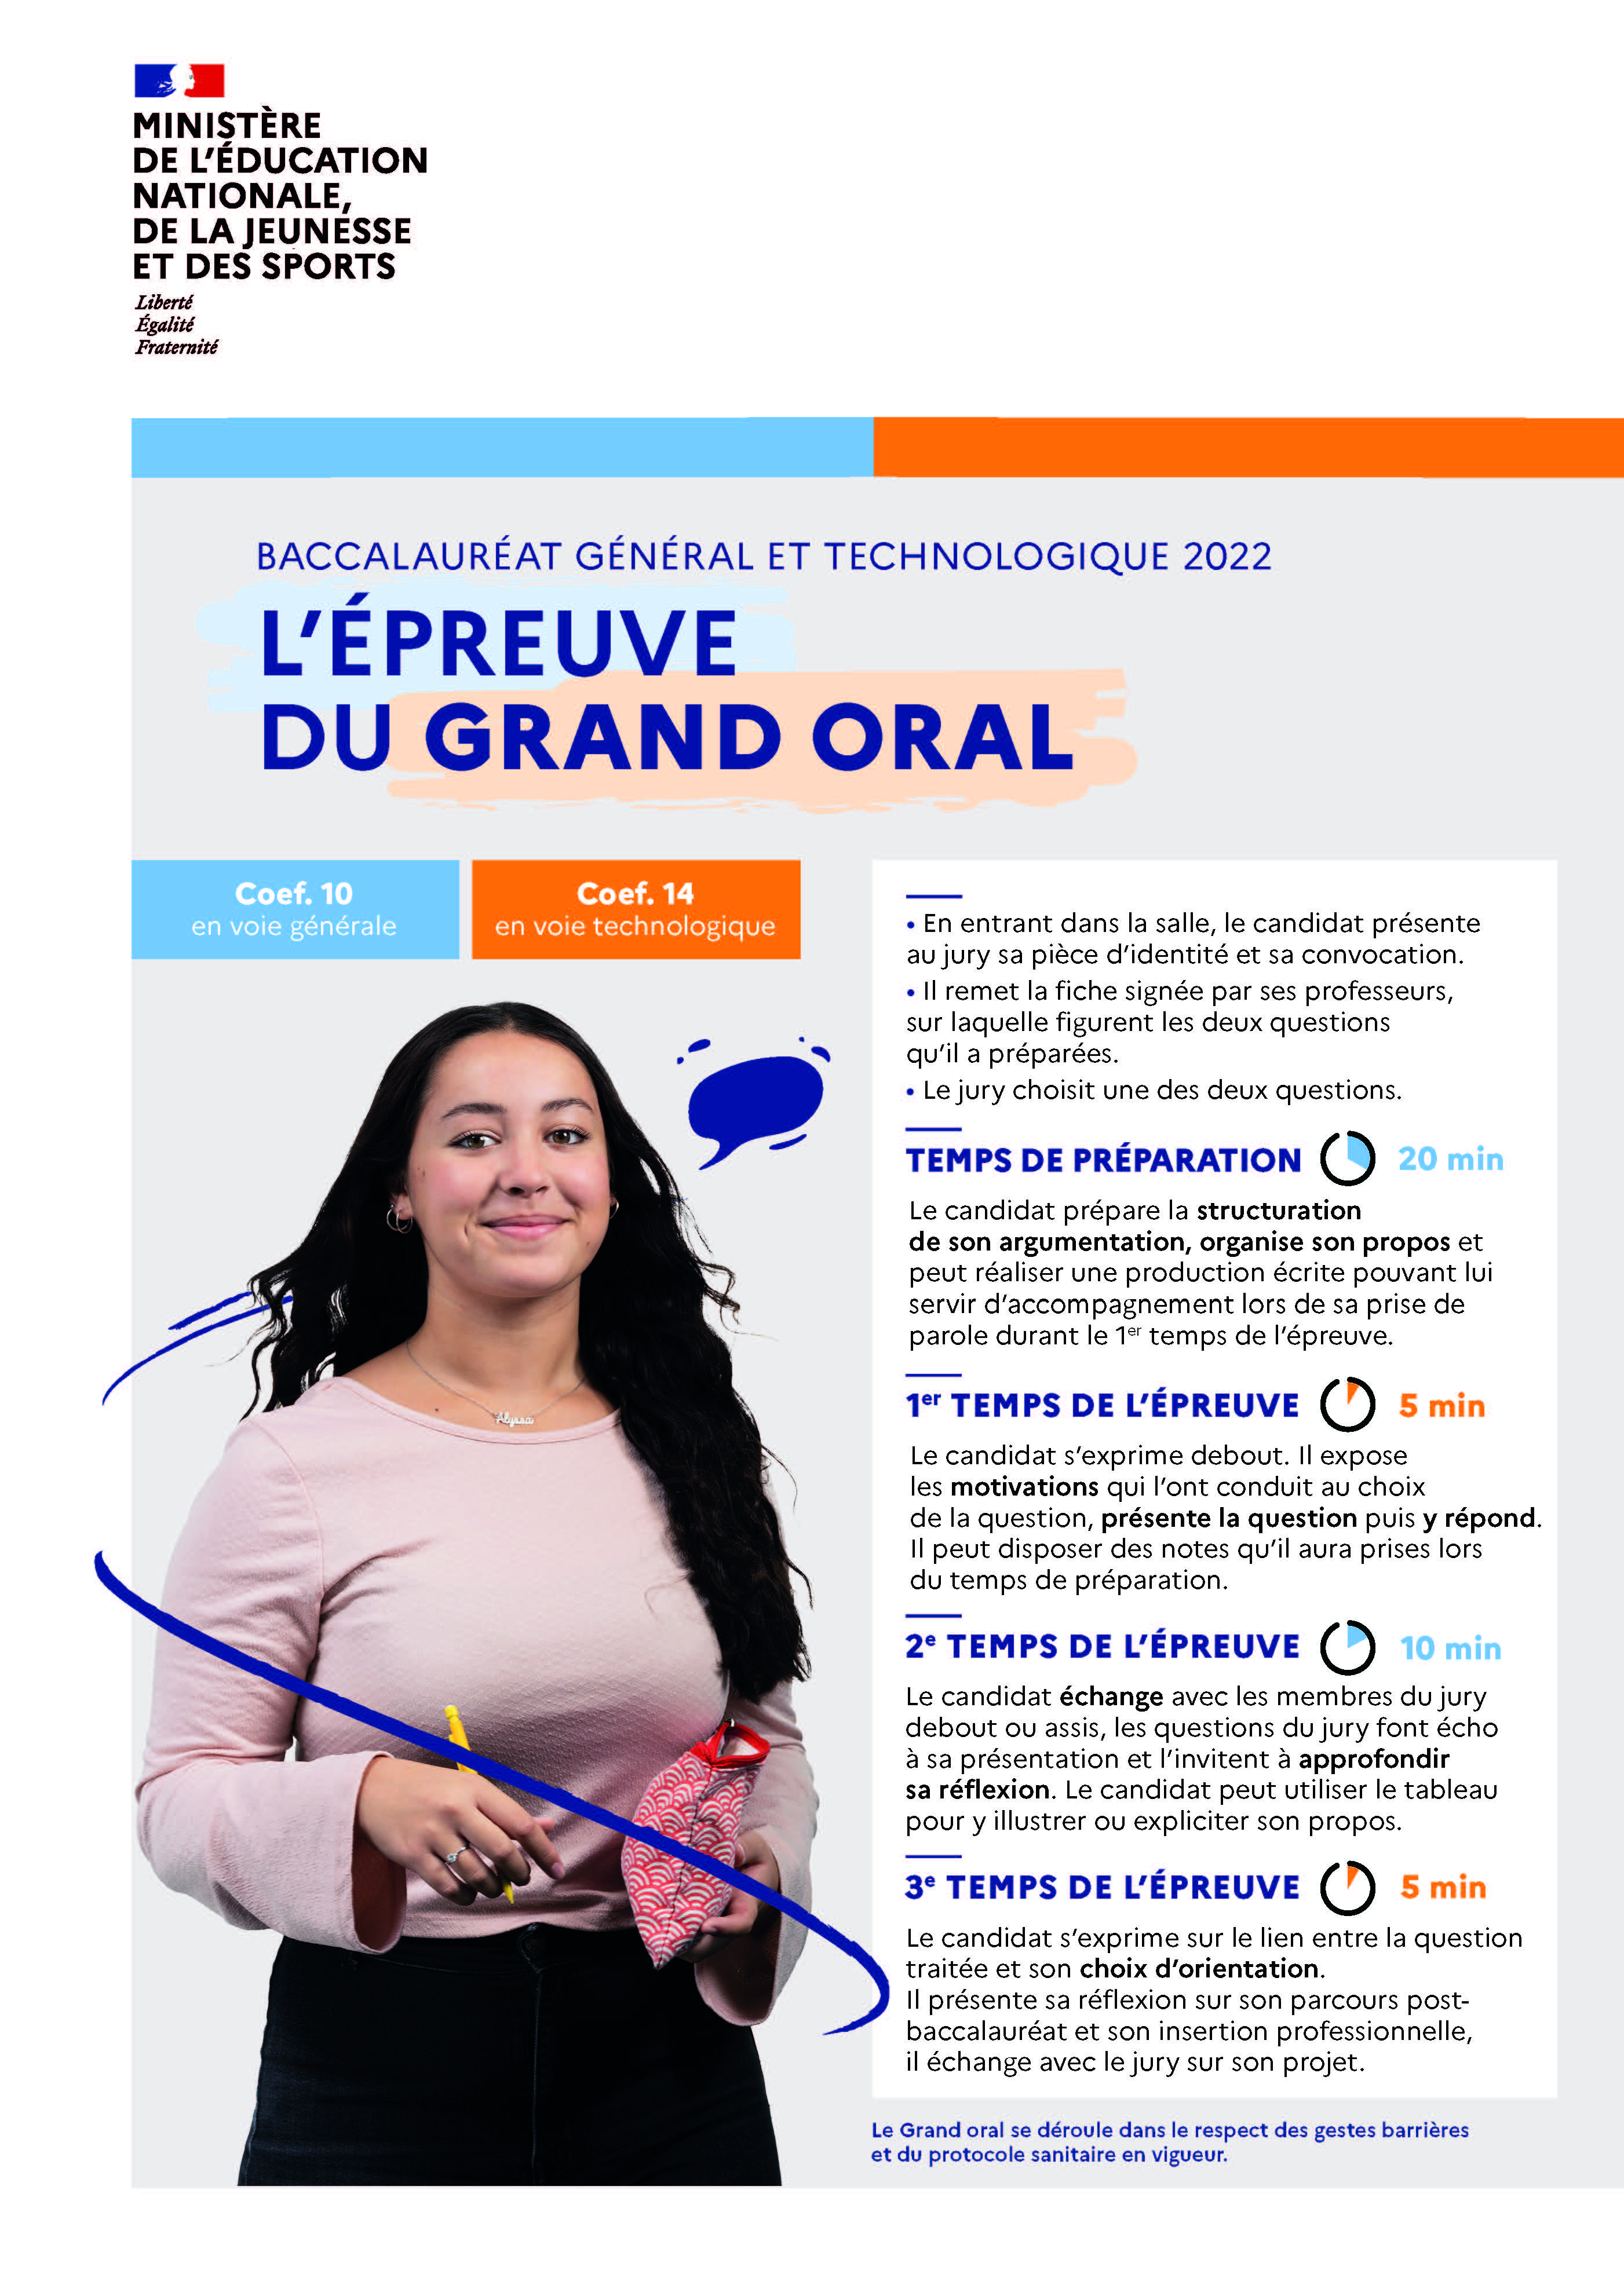  Consignes grand oral baccalauréat 2022 